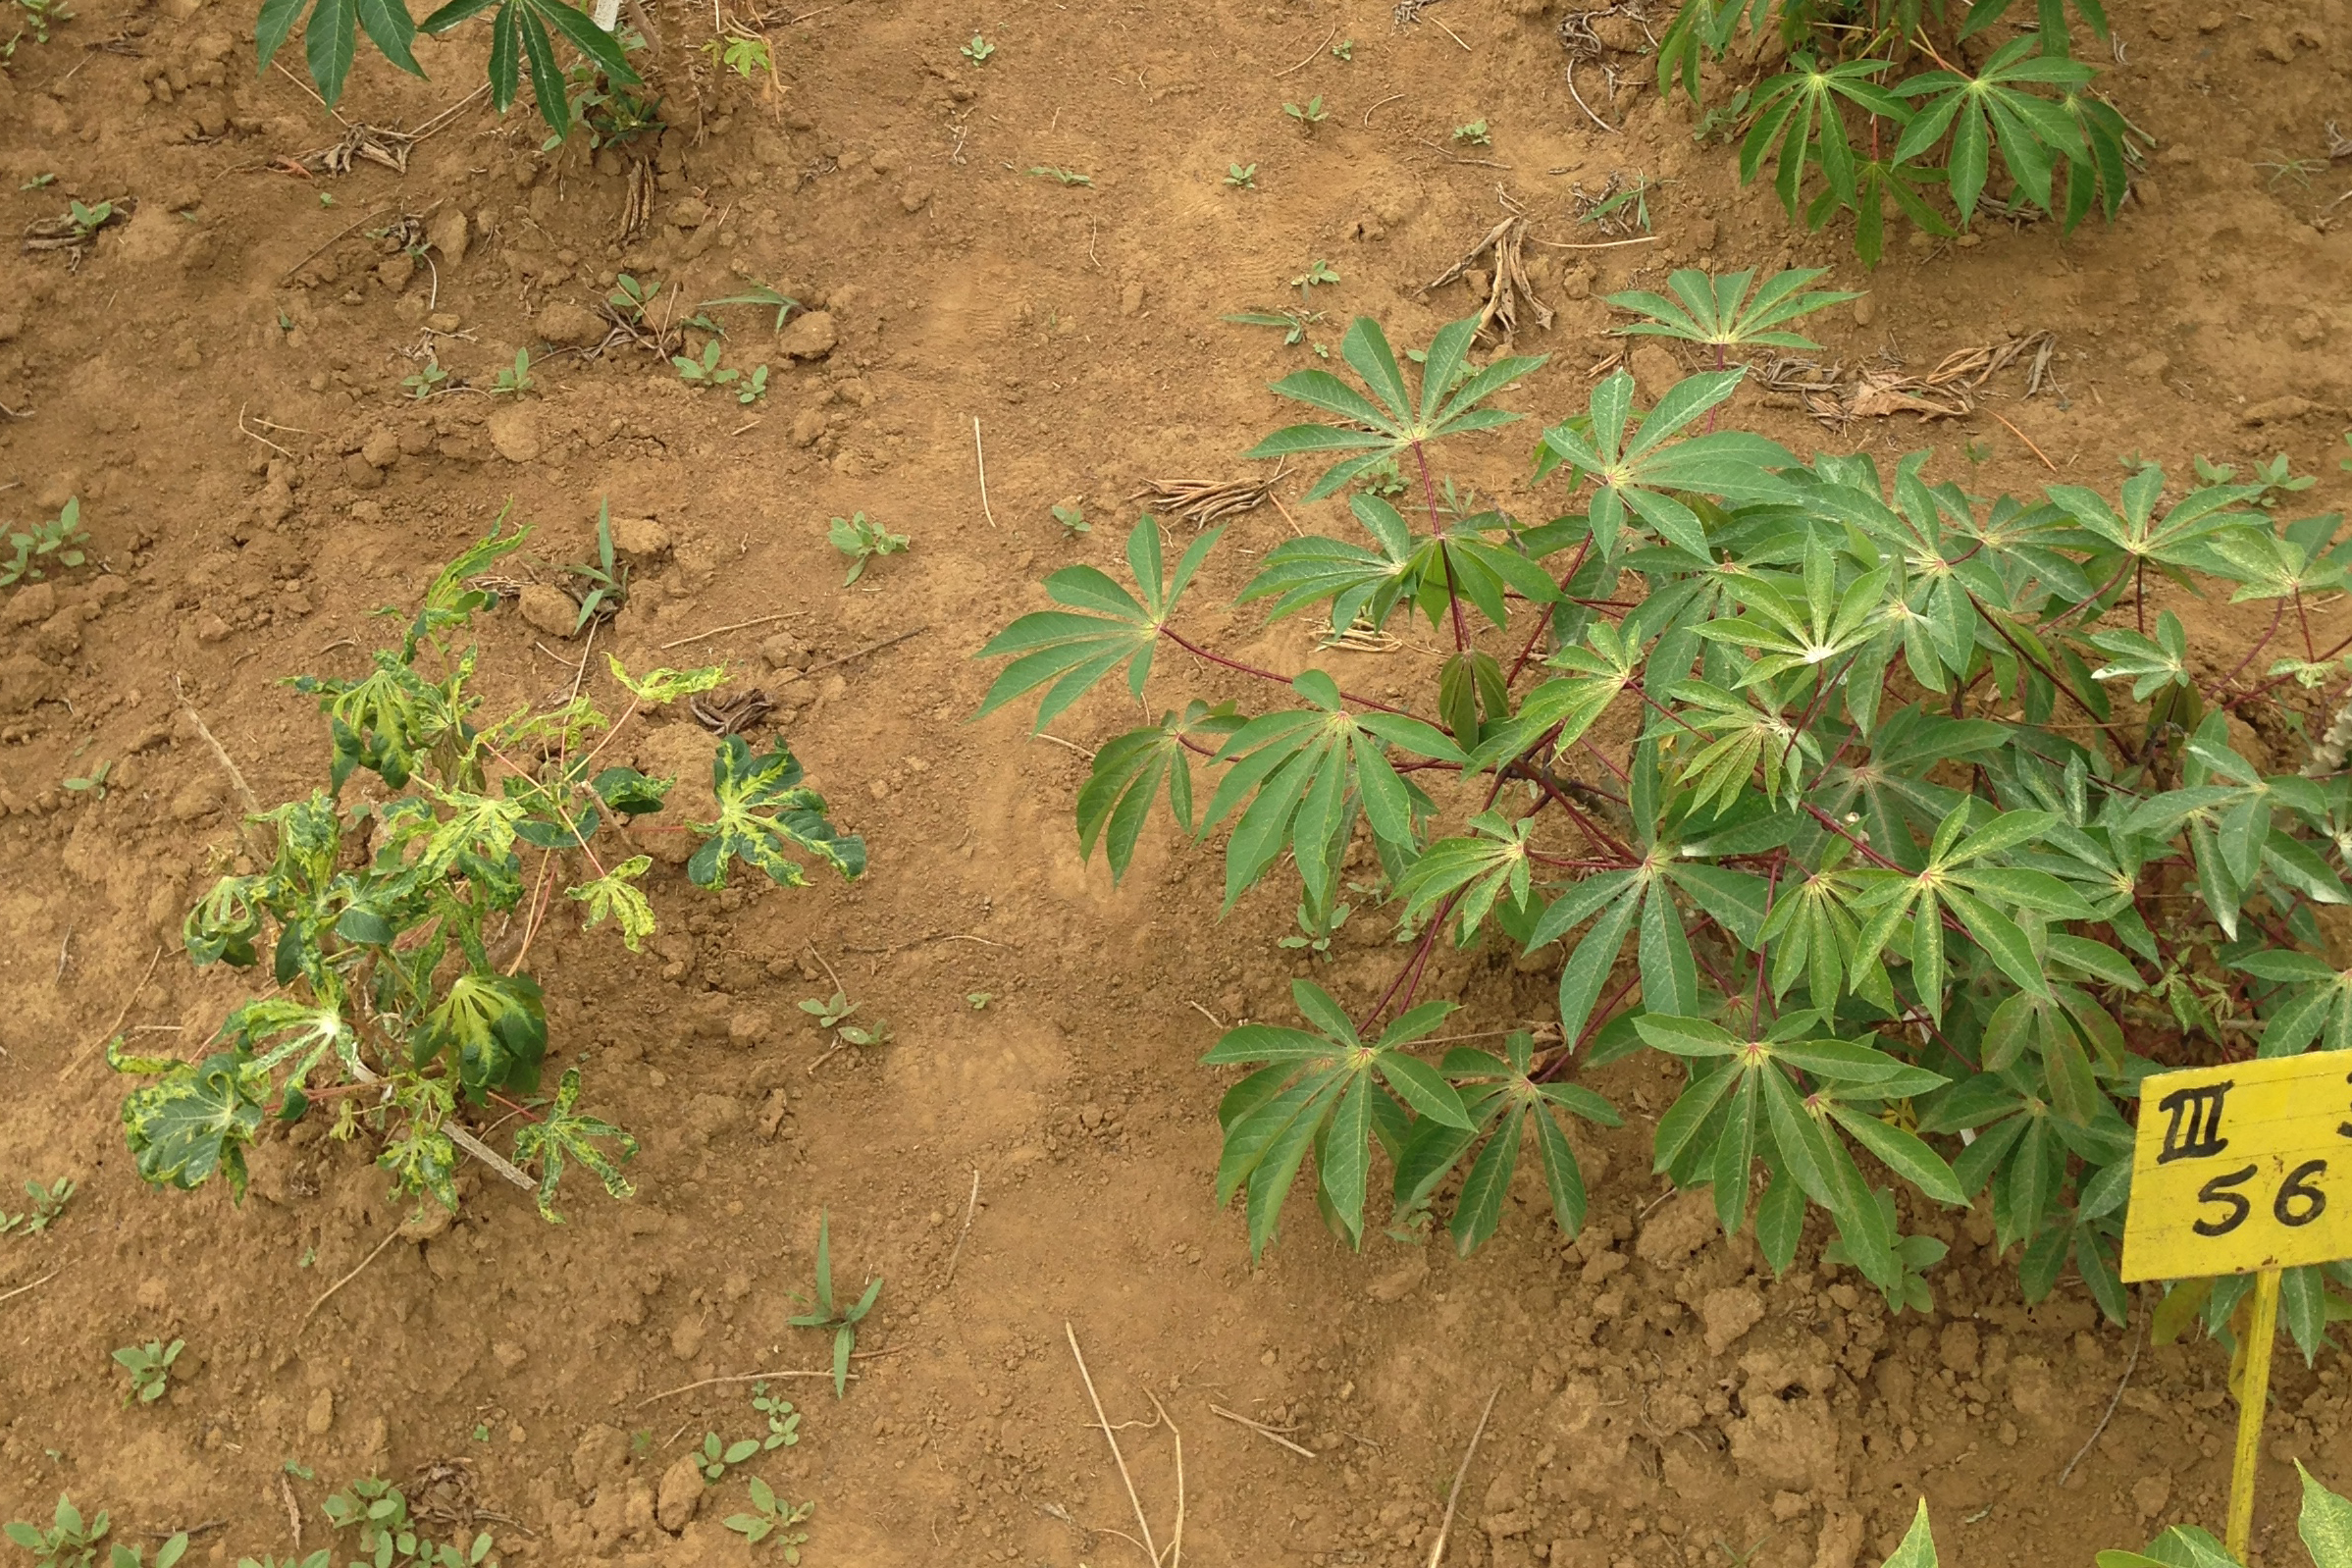 The plant on the left is infected by DNA geneminiviruses that cause cassava mosaic disease, while the plant on the right is healthy. (Photograph: Wilhelm Gruissem / ETH Zurich)